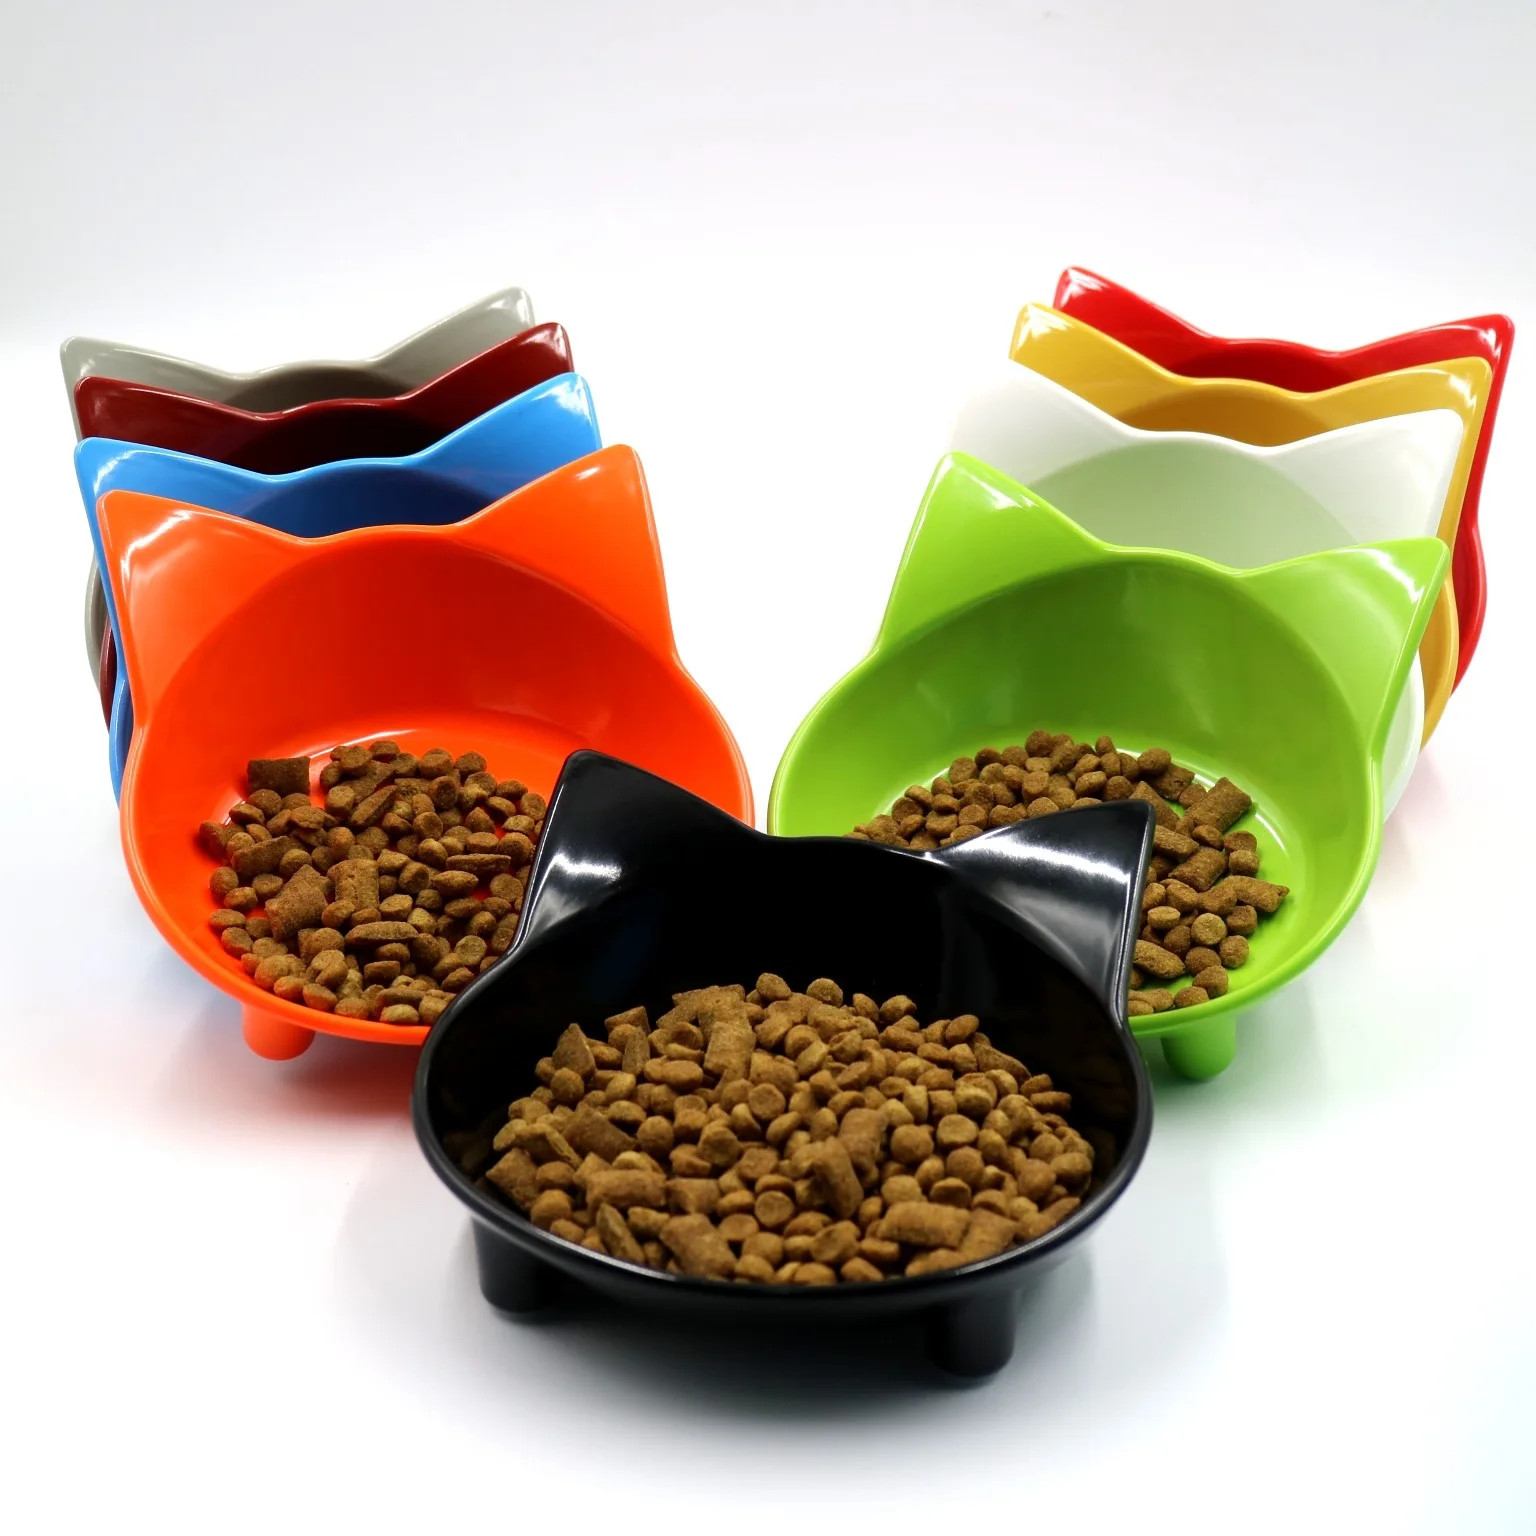 

Ultimate Cat Bowl for Non Slip Shallow and Fatigue Relief Melamine Pet Food Bowl for Your Feline Friend The Perfect Cat Type